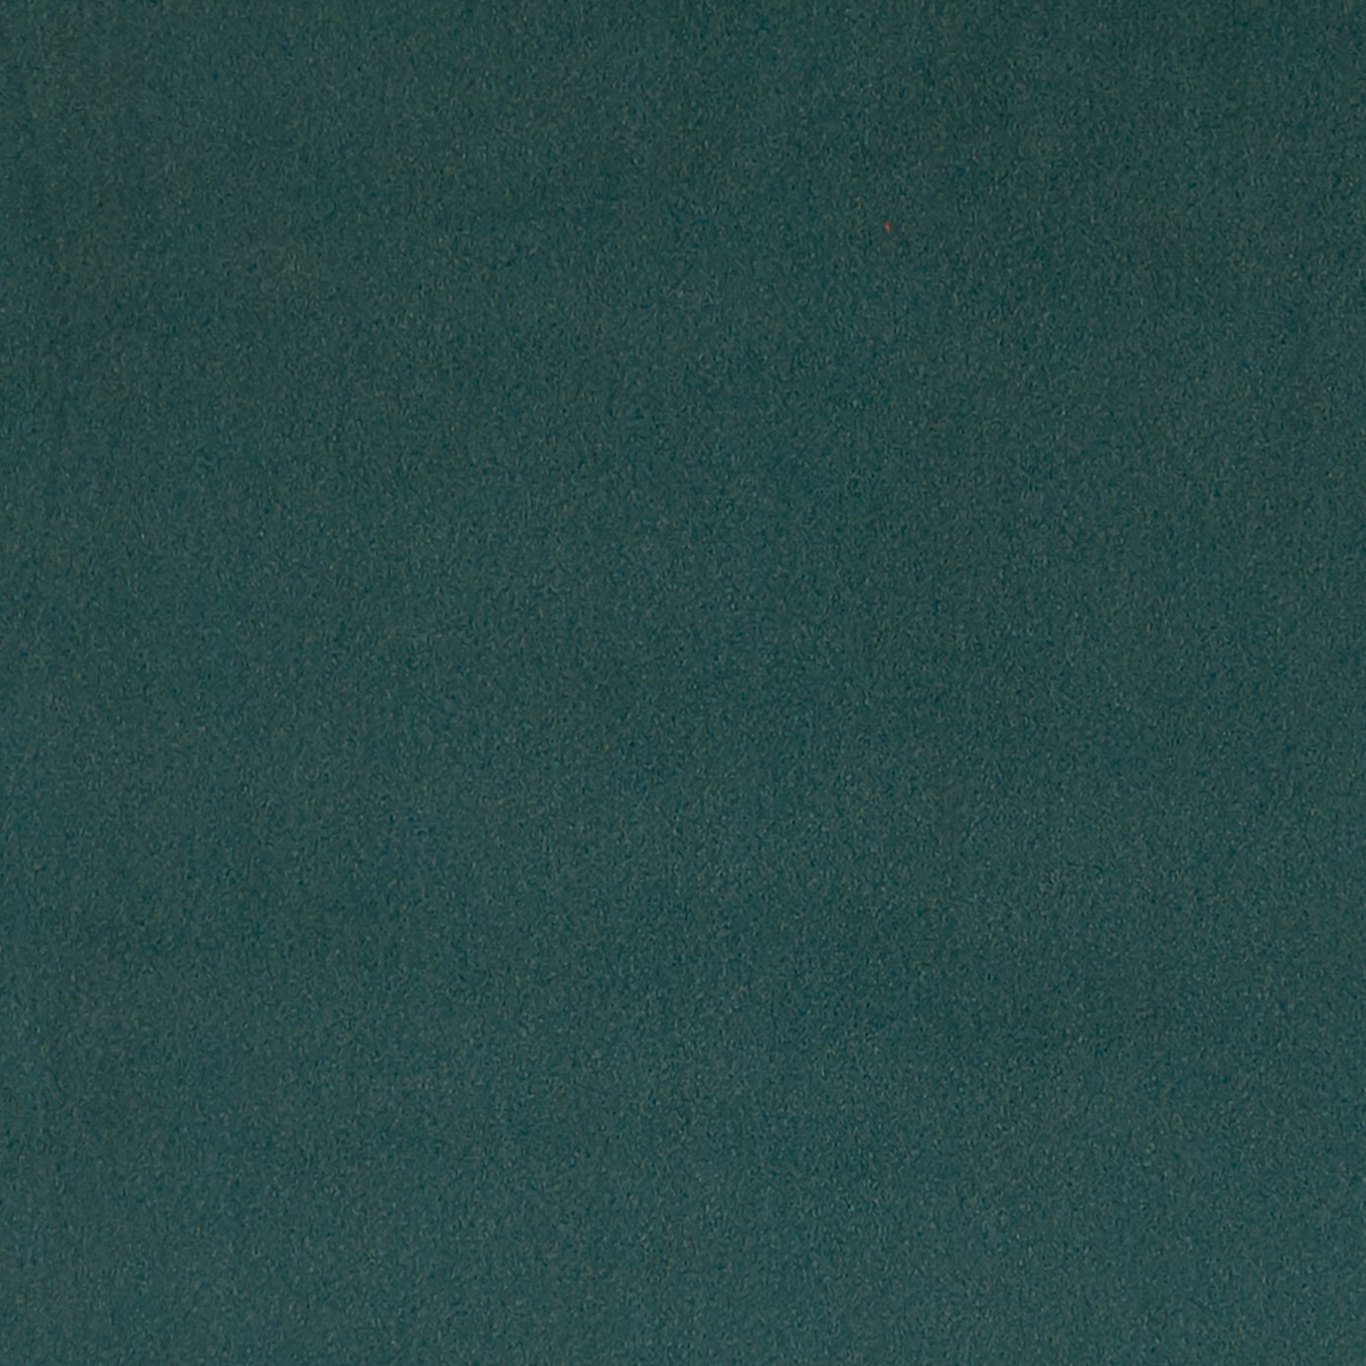 Lucca Teal Fabric by STG